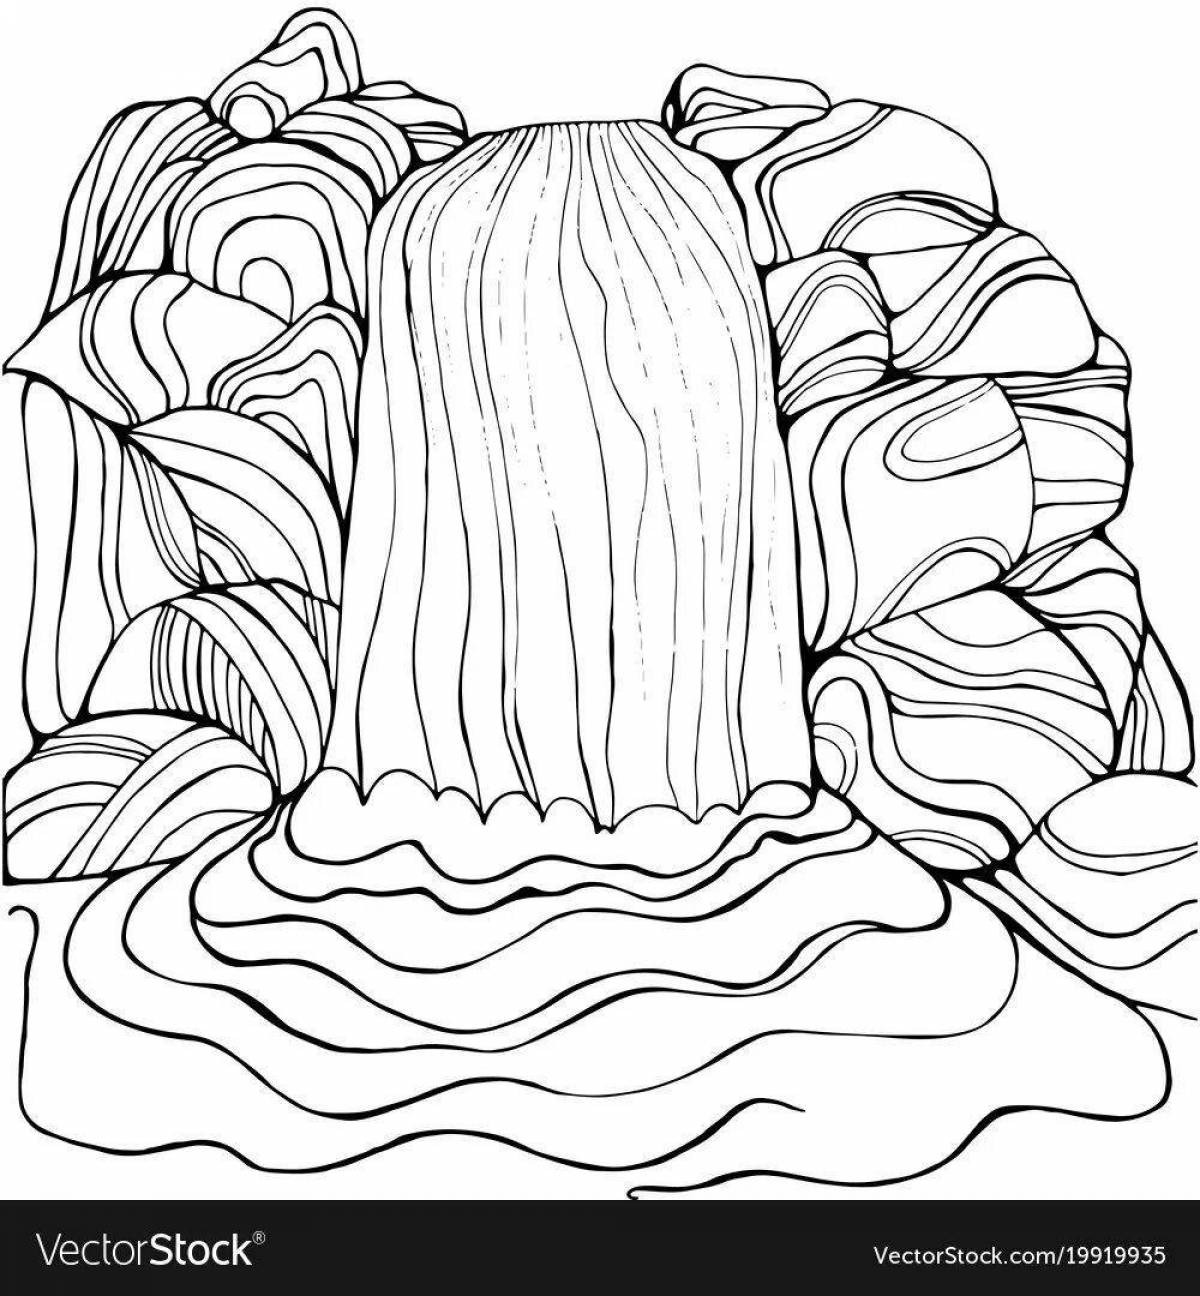 Colourful waterfall coloring book for kids